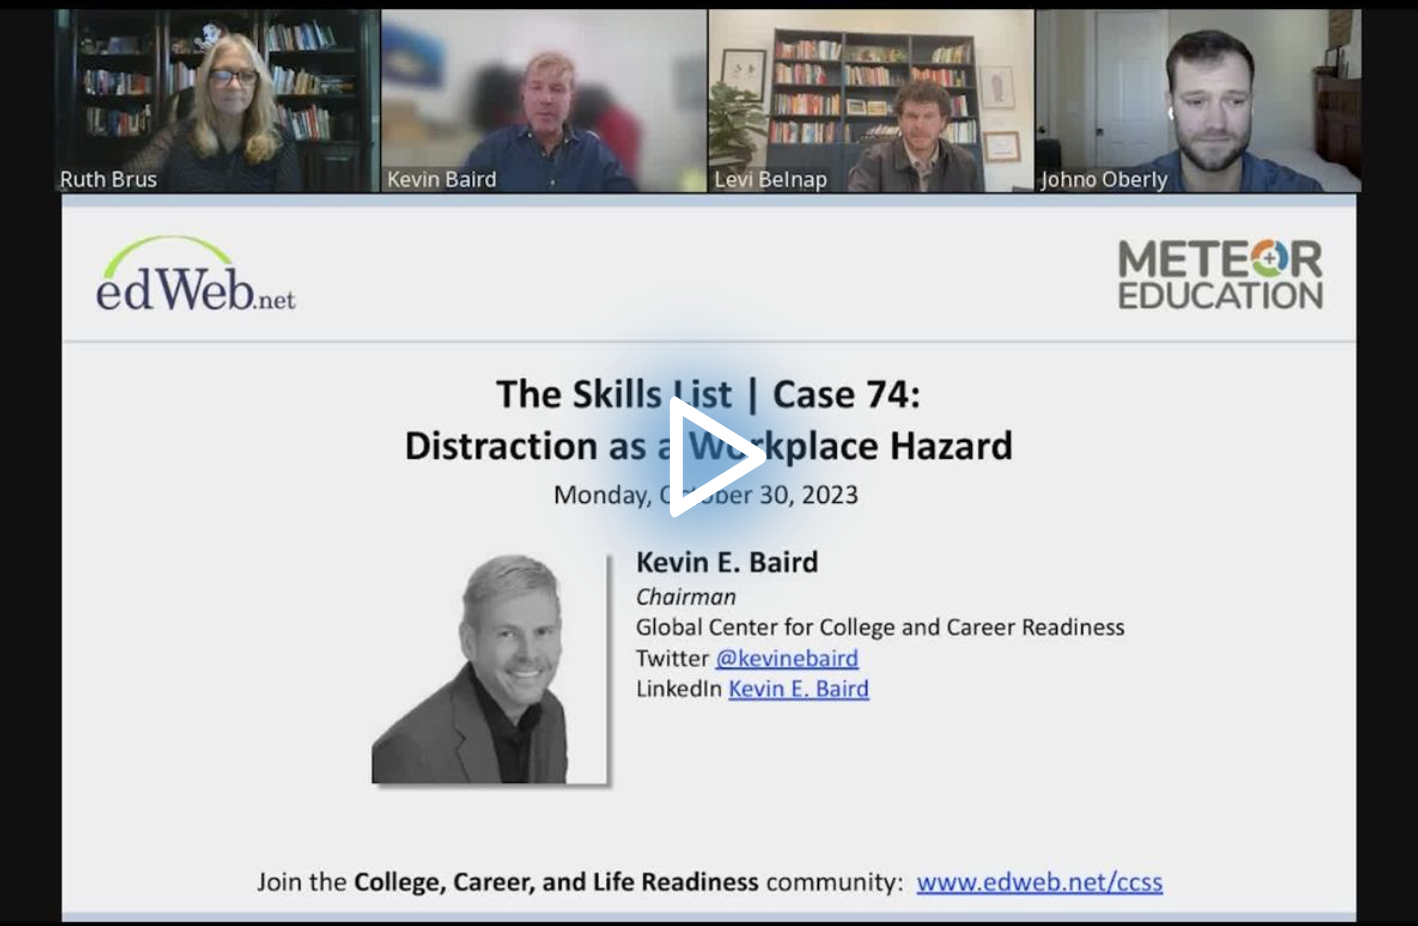 The Skills List | Case 74: Distraction as a Workplace Hazard edLeader Panel recording screenshot